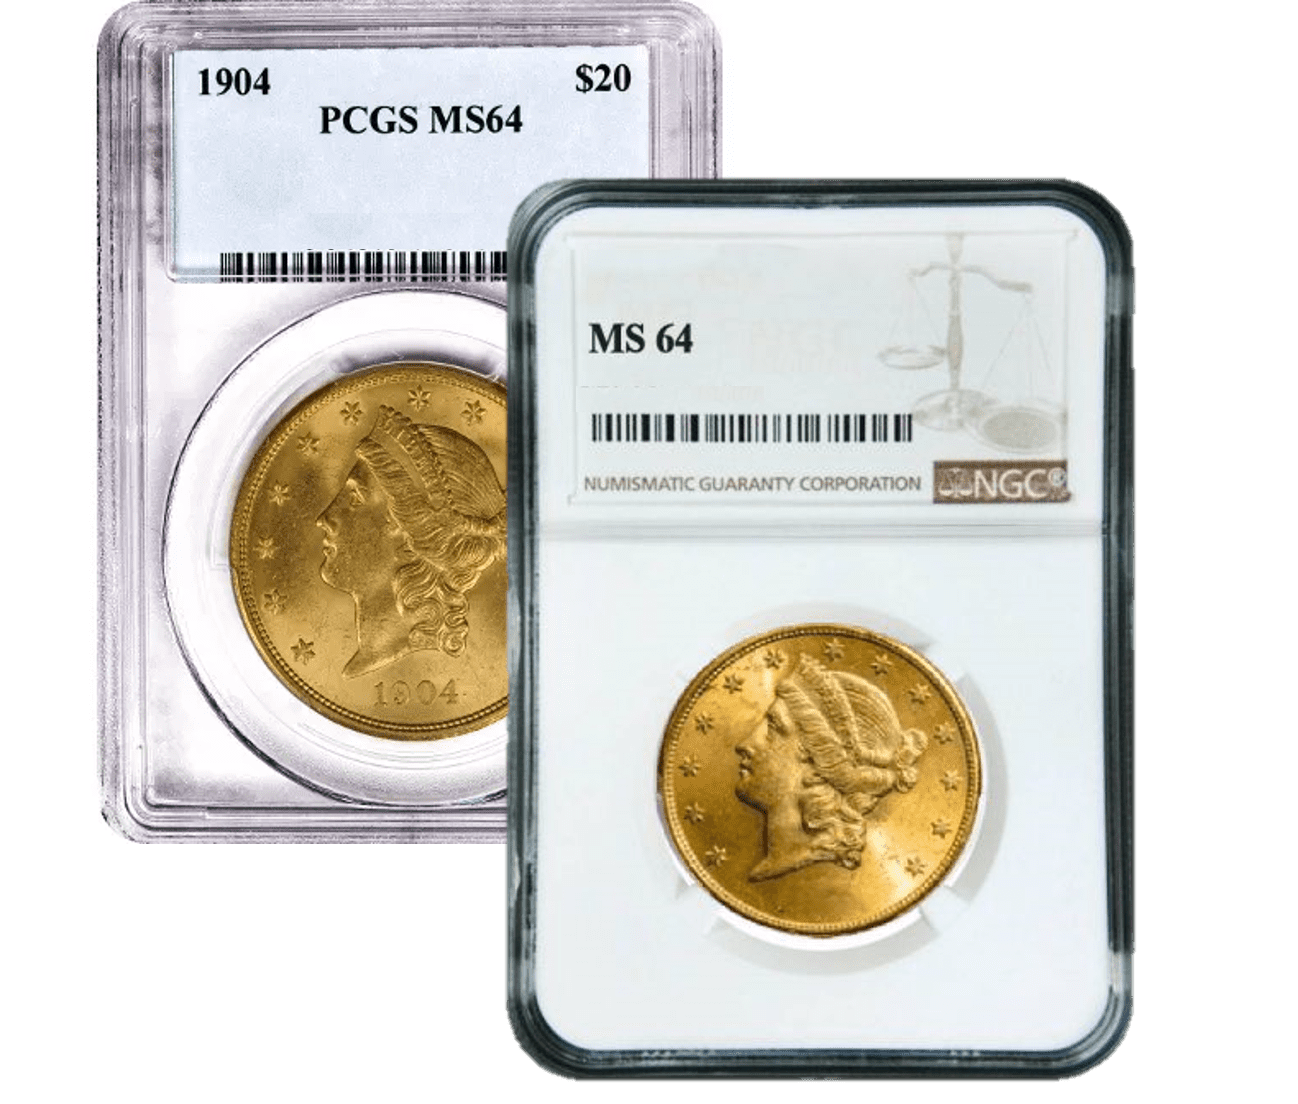 Certified/Graded Gold